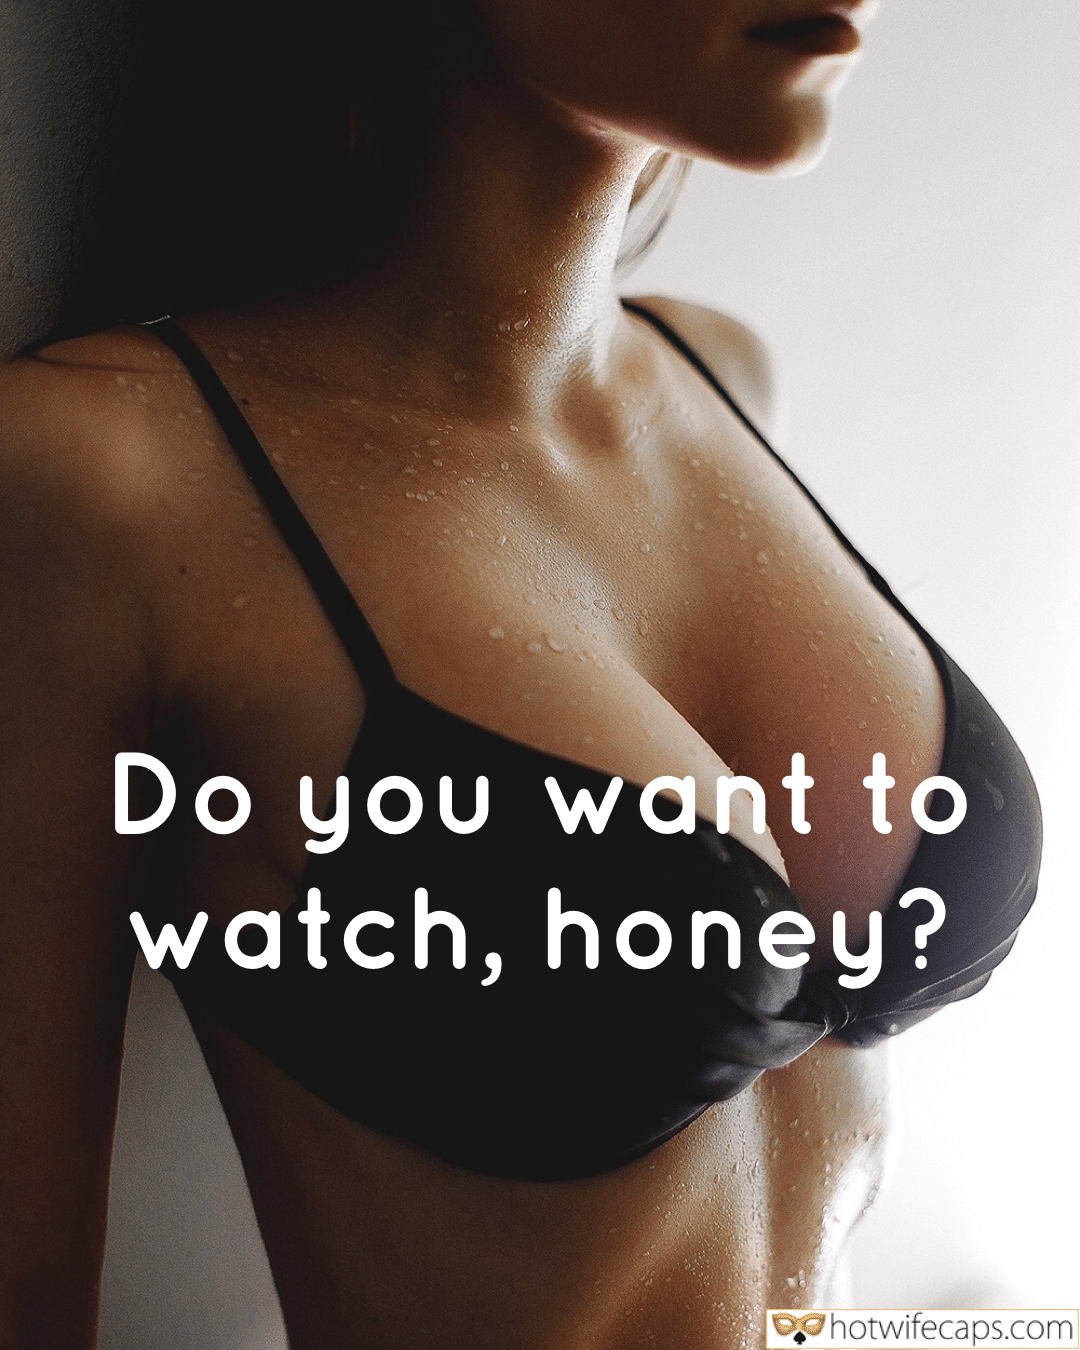 Sexy Memes Cuckold Cleanup Cheating hotwife caption: Do you want to watch, honey? An Excited Girl in a Black Bra